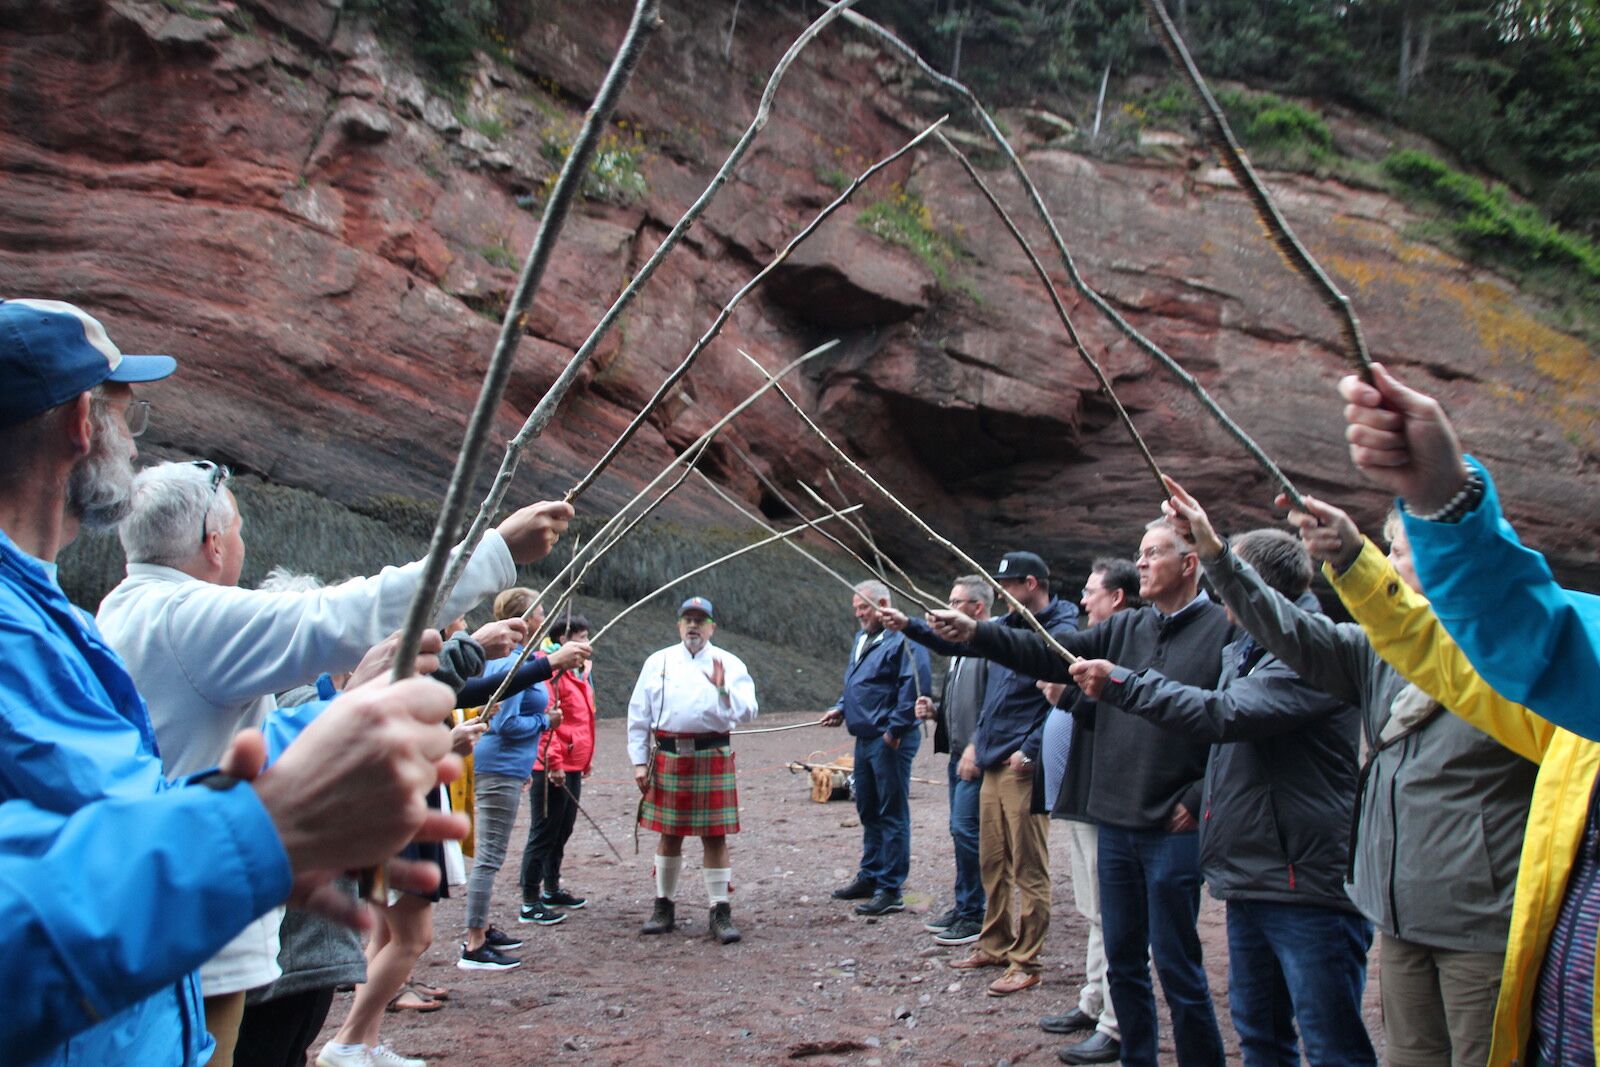 end of dinner dance with guests holding up sticks and chef in the background - savour the sea caves